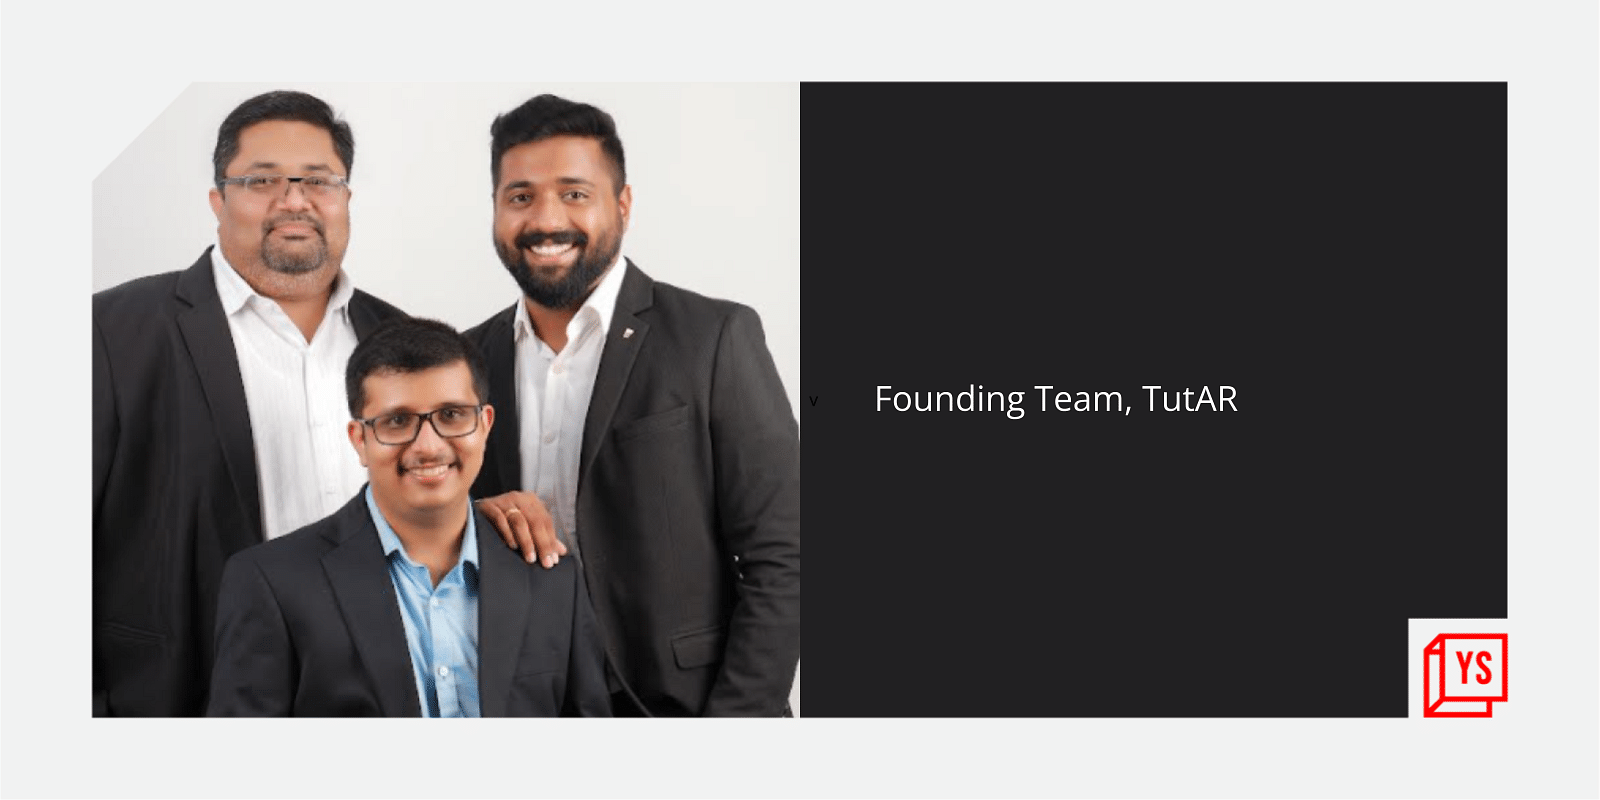 You are currently viewing [YS Exclusive] Edtech startup TutAR raises seed round from April Ventures, SalesboxAI’s founder Roy Rajan